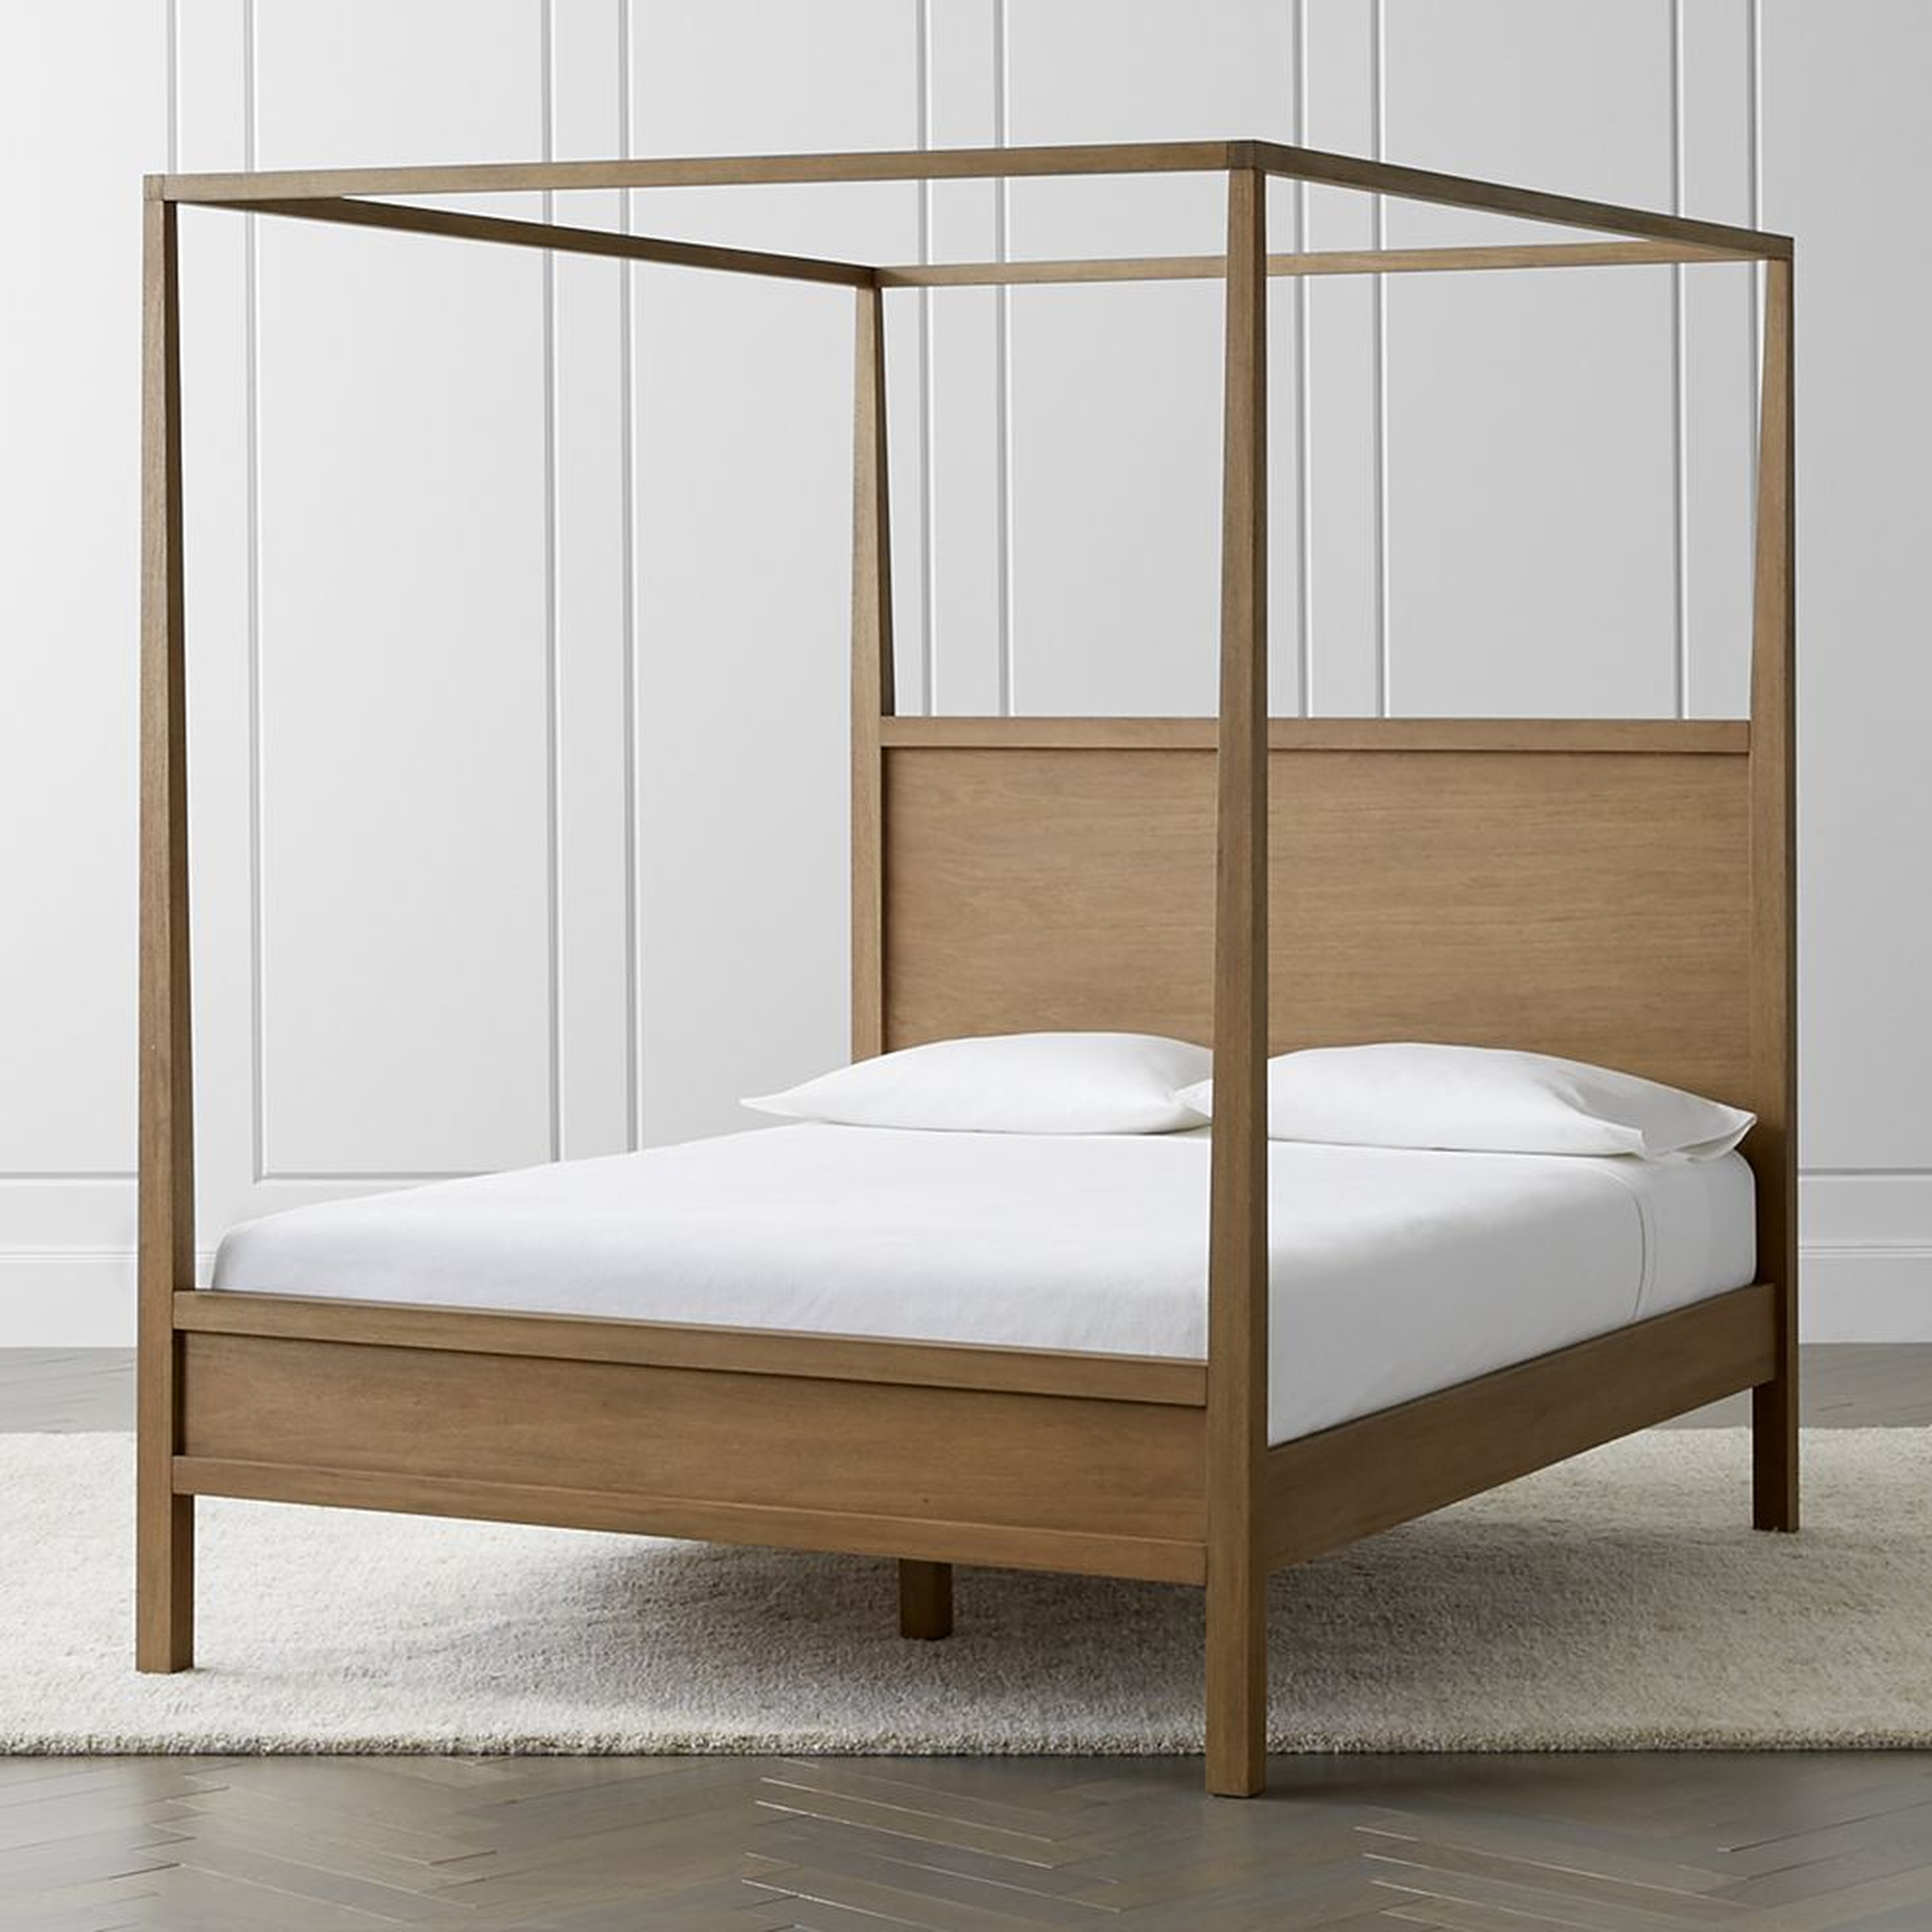 Keane Driftwood Queen Canopy Bed - Crate and Barrel